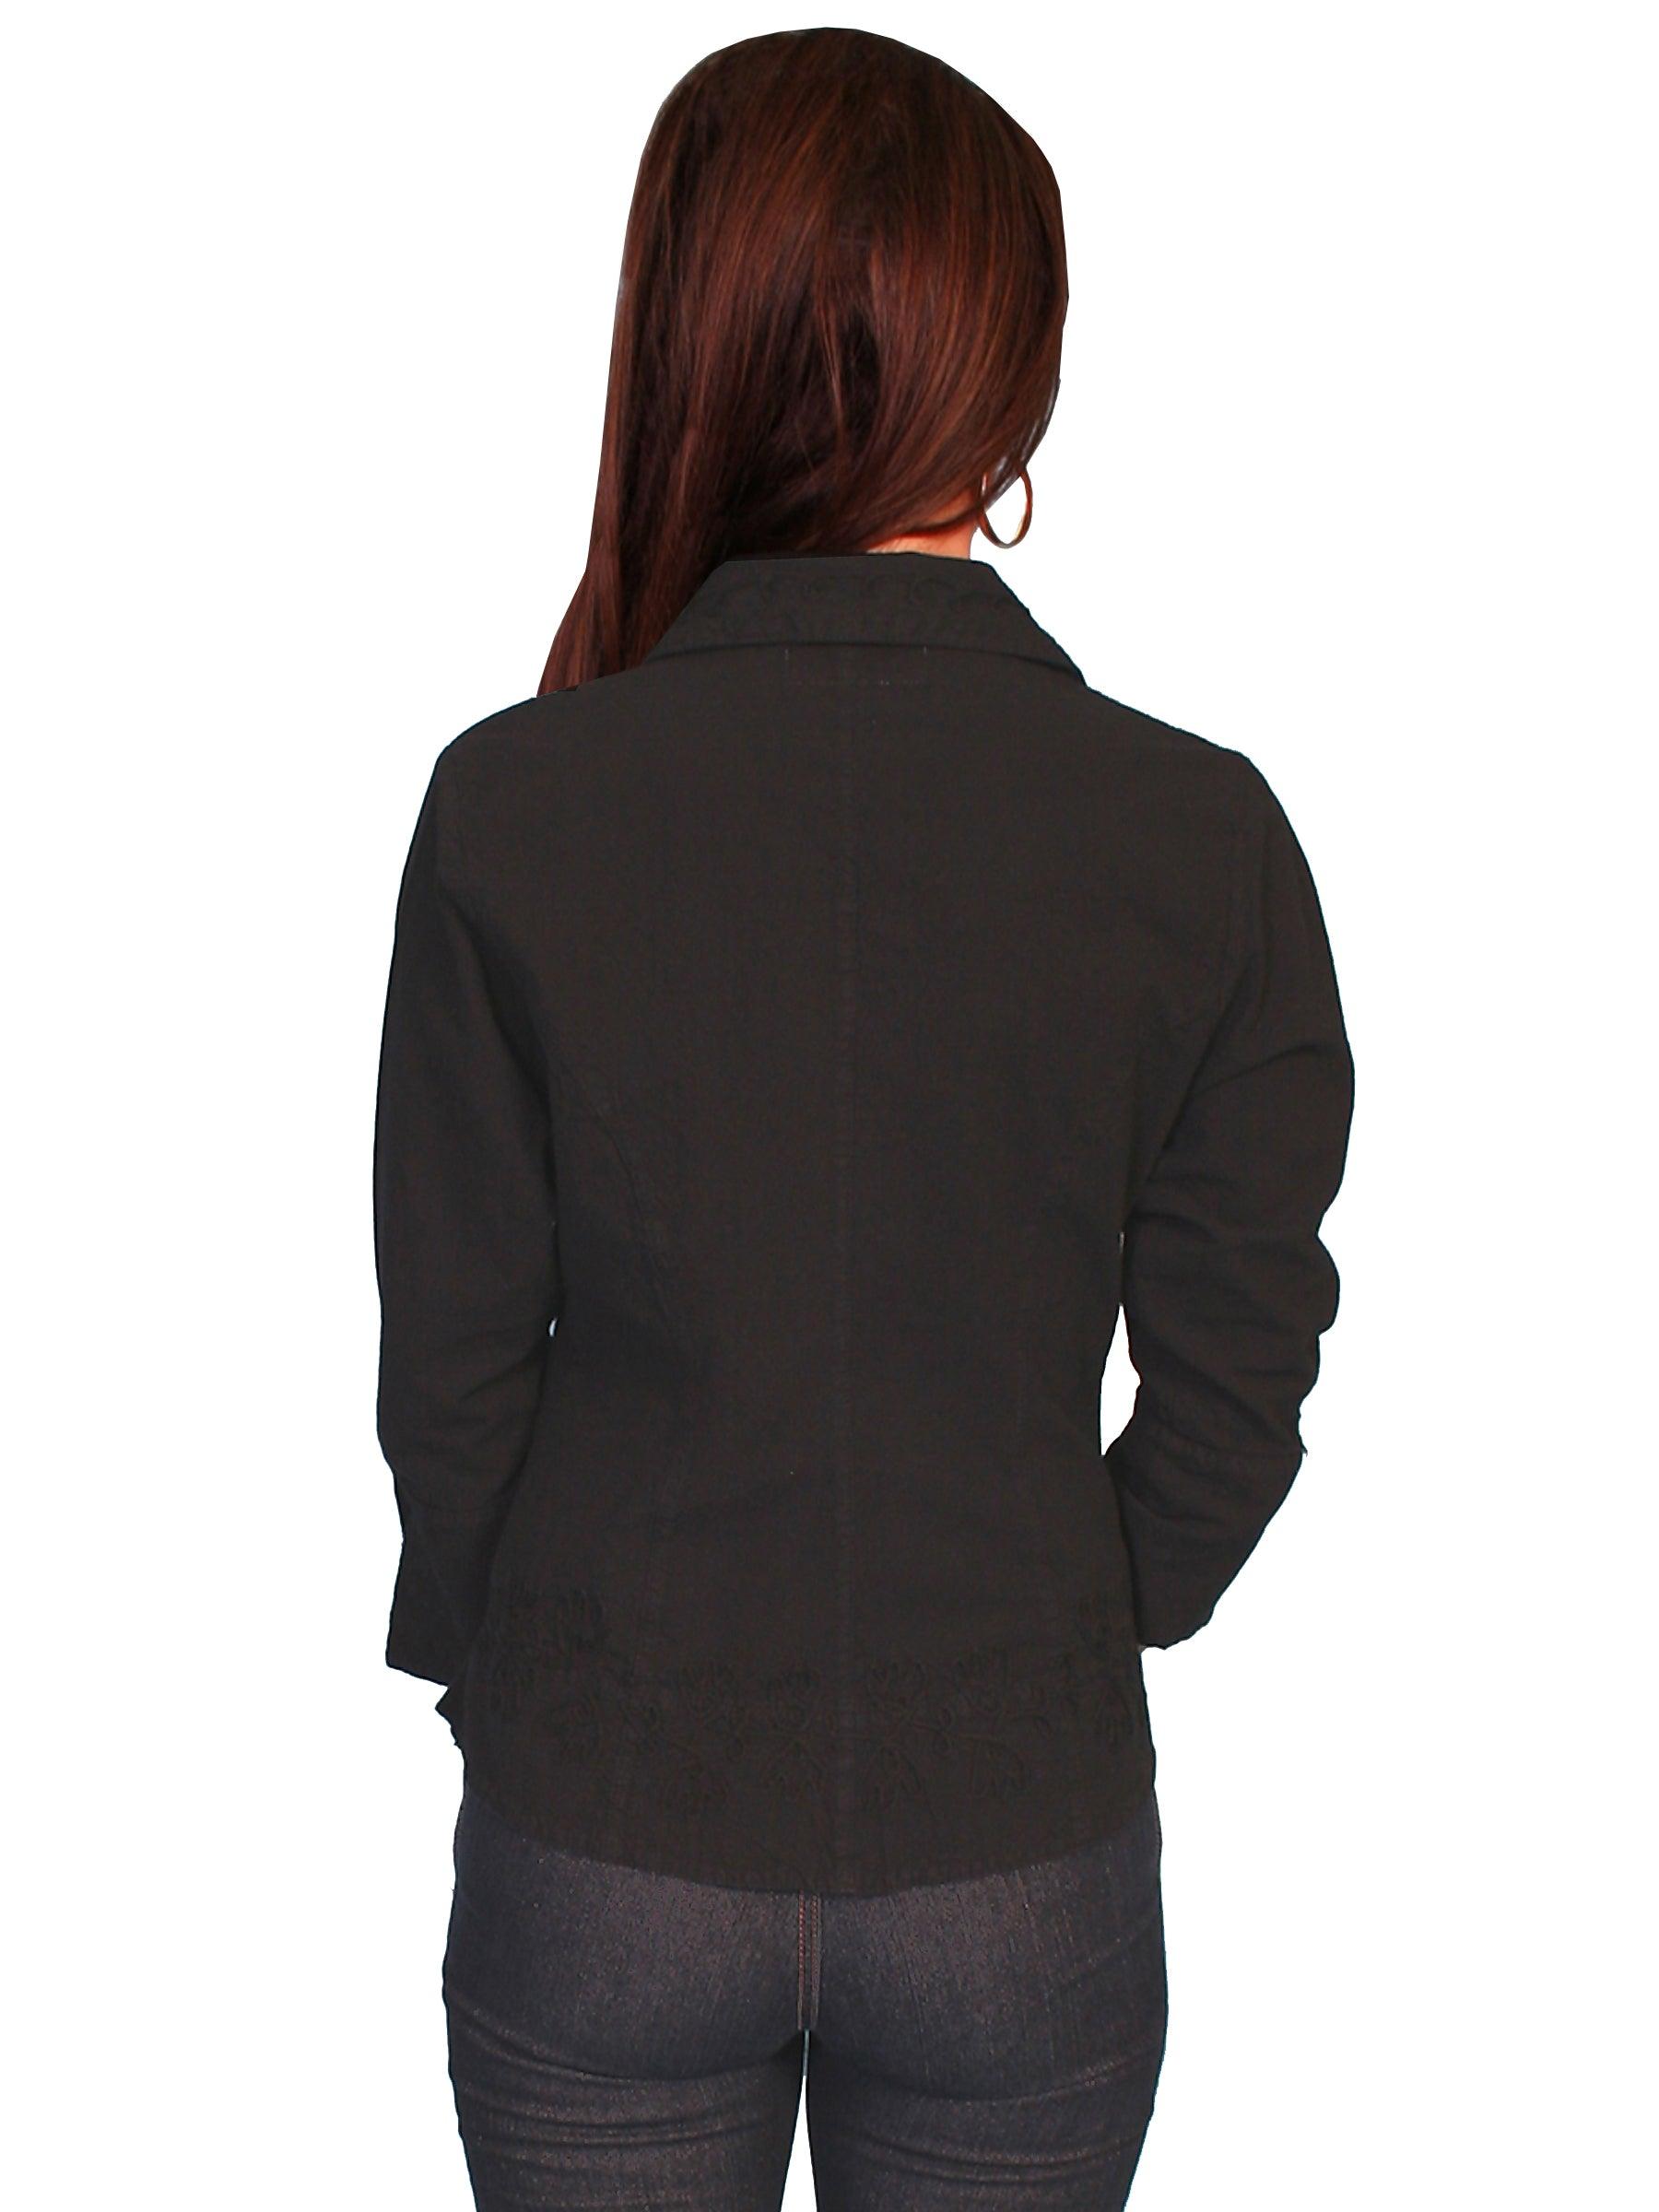 Scully BLACK 3/4 SLEEVE PERUVIAN COTTON BLOUSE - Flyclothing LLC